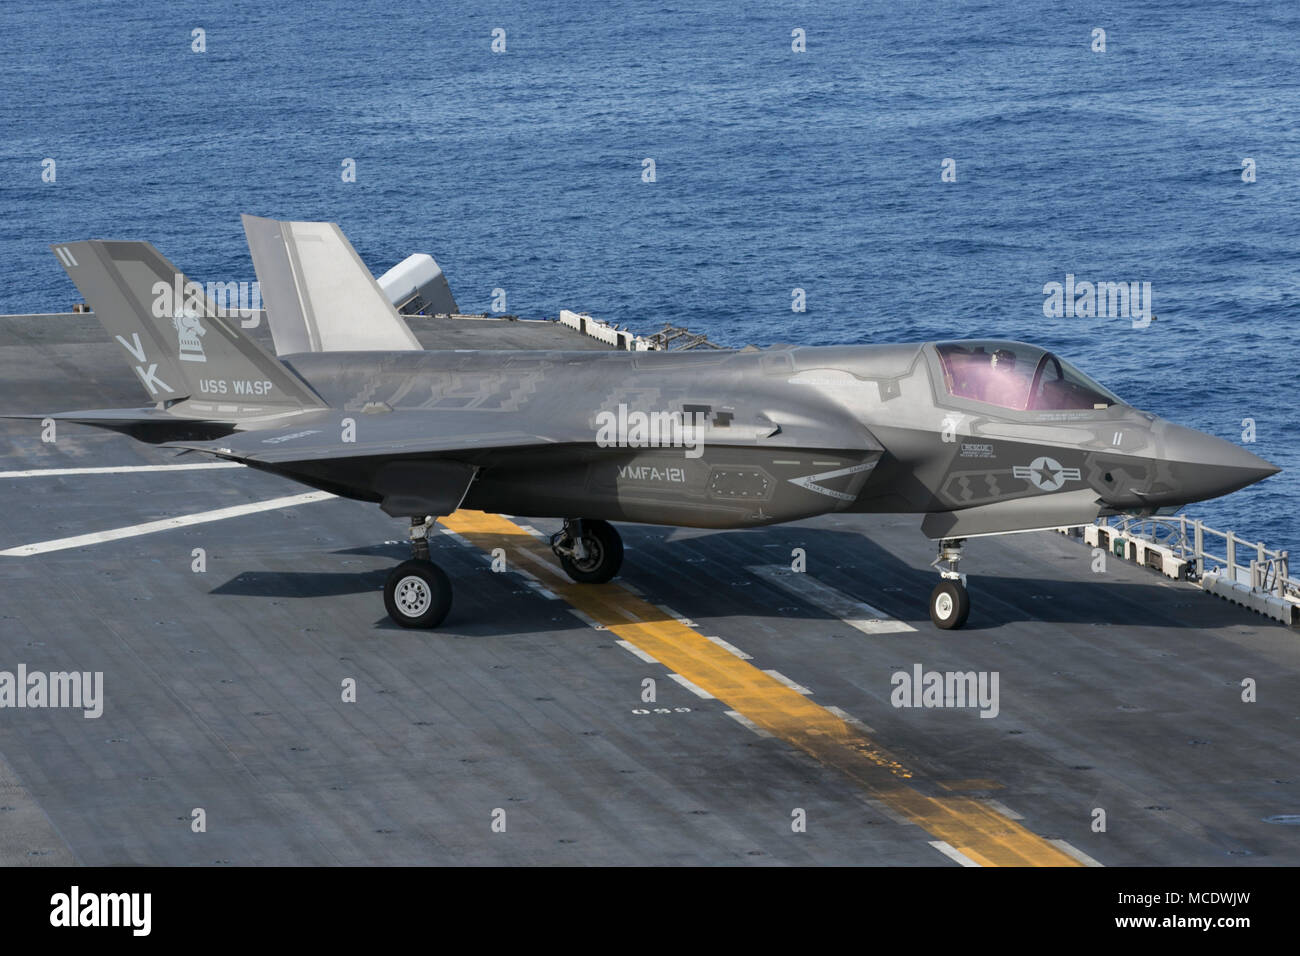 An F-35B Lightning II prepares to take off of the flight deck of the USS Wasp (LHD-1) while off the coast of Okinawa, Japan, April 13, 2018. A detachment of F-35Bs with Marine Fighter Attack Squadron 121 joined the USS Wasp for Spring Patrol 2018, marking the F-35’s first operational deployment with a MEU. As the Marine Corps’ only continuously forward-deployed MEU, the 31st Marine Expeditionary Unit provides a flexible force ready to perform a wide range of military operations throughout the Indo-Pacific region. (U.S. Marine Corps photo by Lance Cpl. Amy Phan/Released) Stock Photo